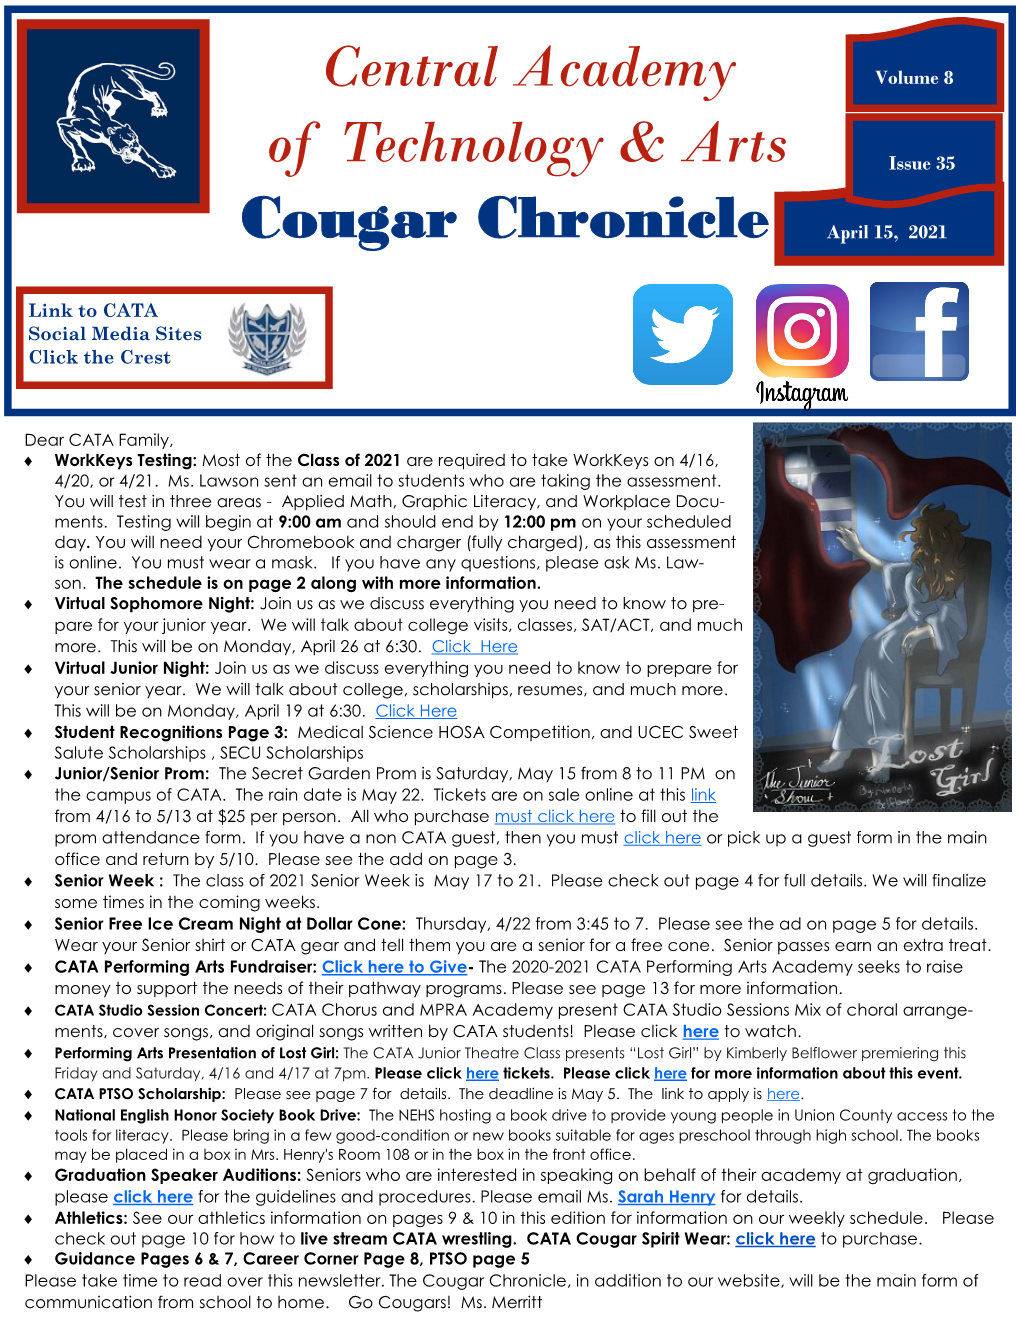 CATA Cougar Chronicle Volume 8, Issue 35